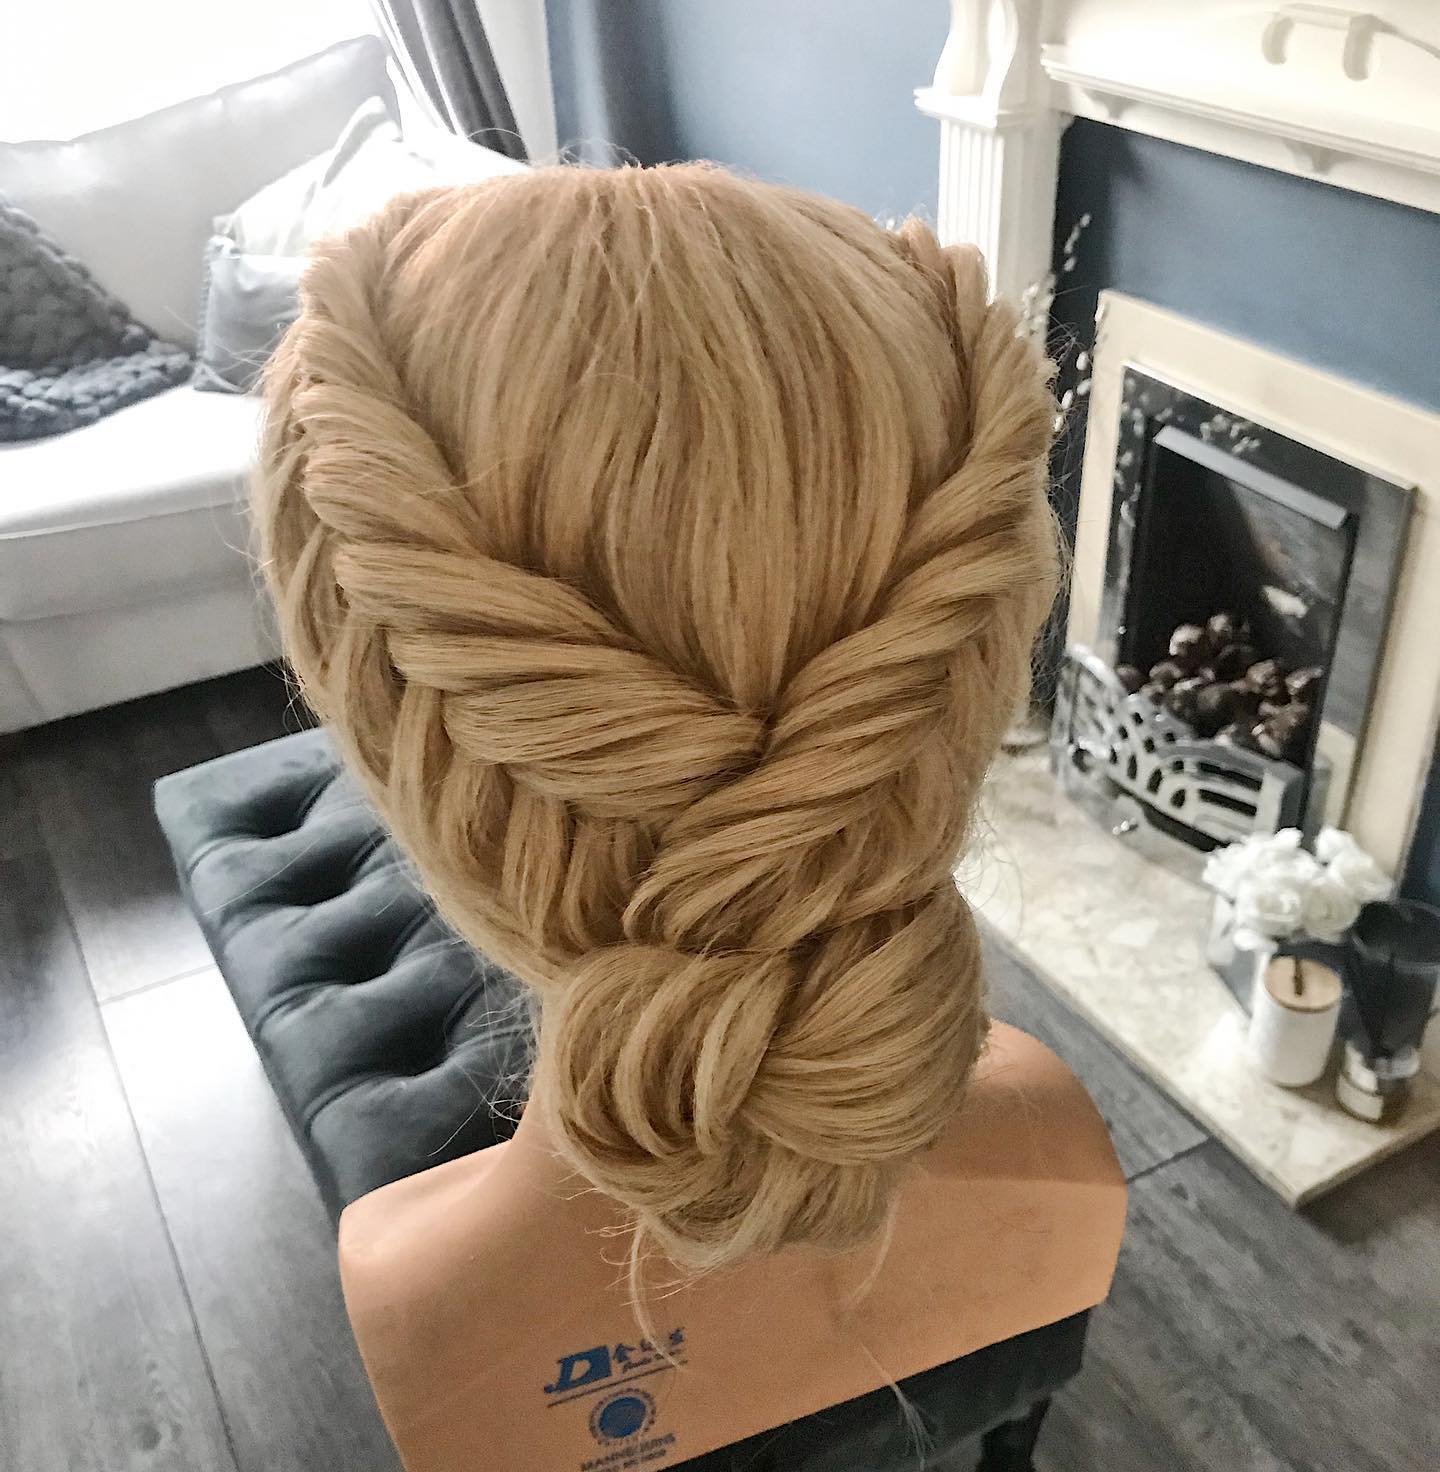 Braided Crown with a Low Bun